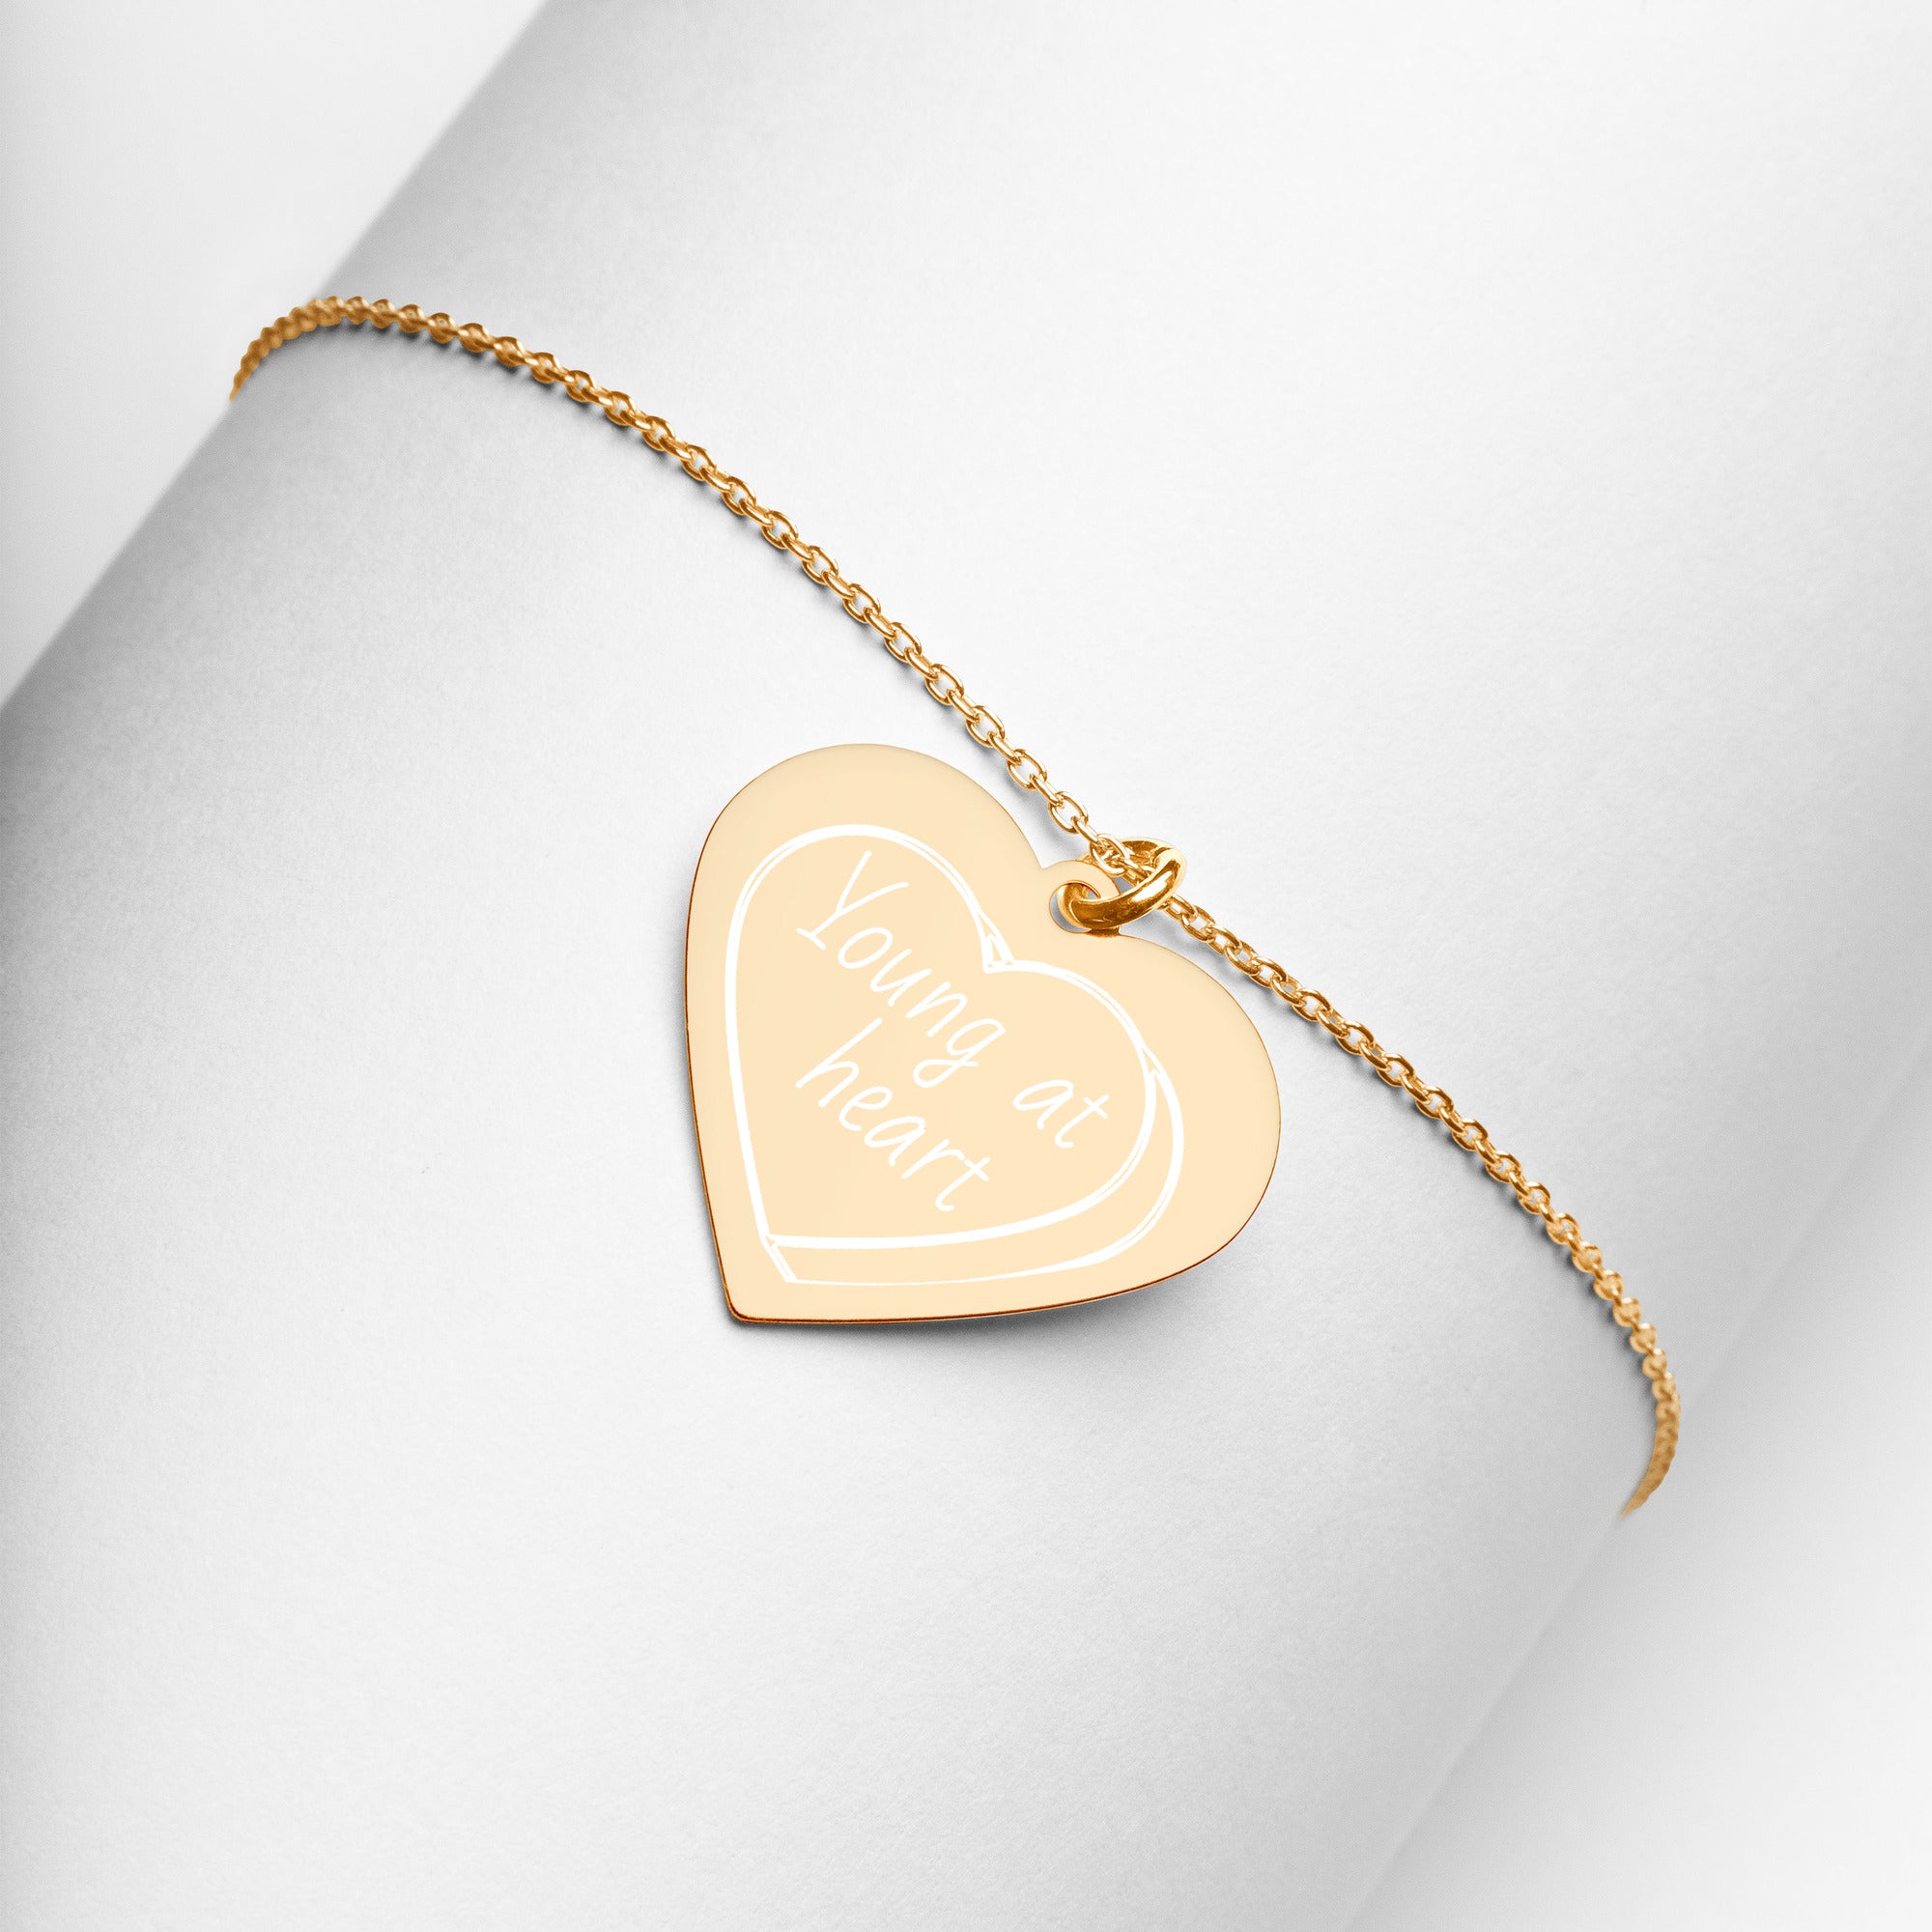 Engraved Silver Heart Necklace - Young Hugs